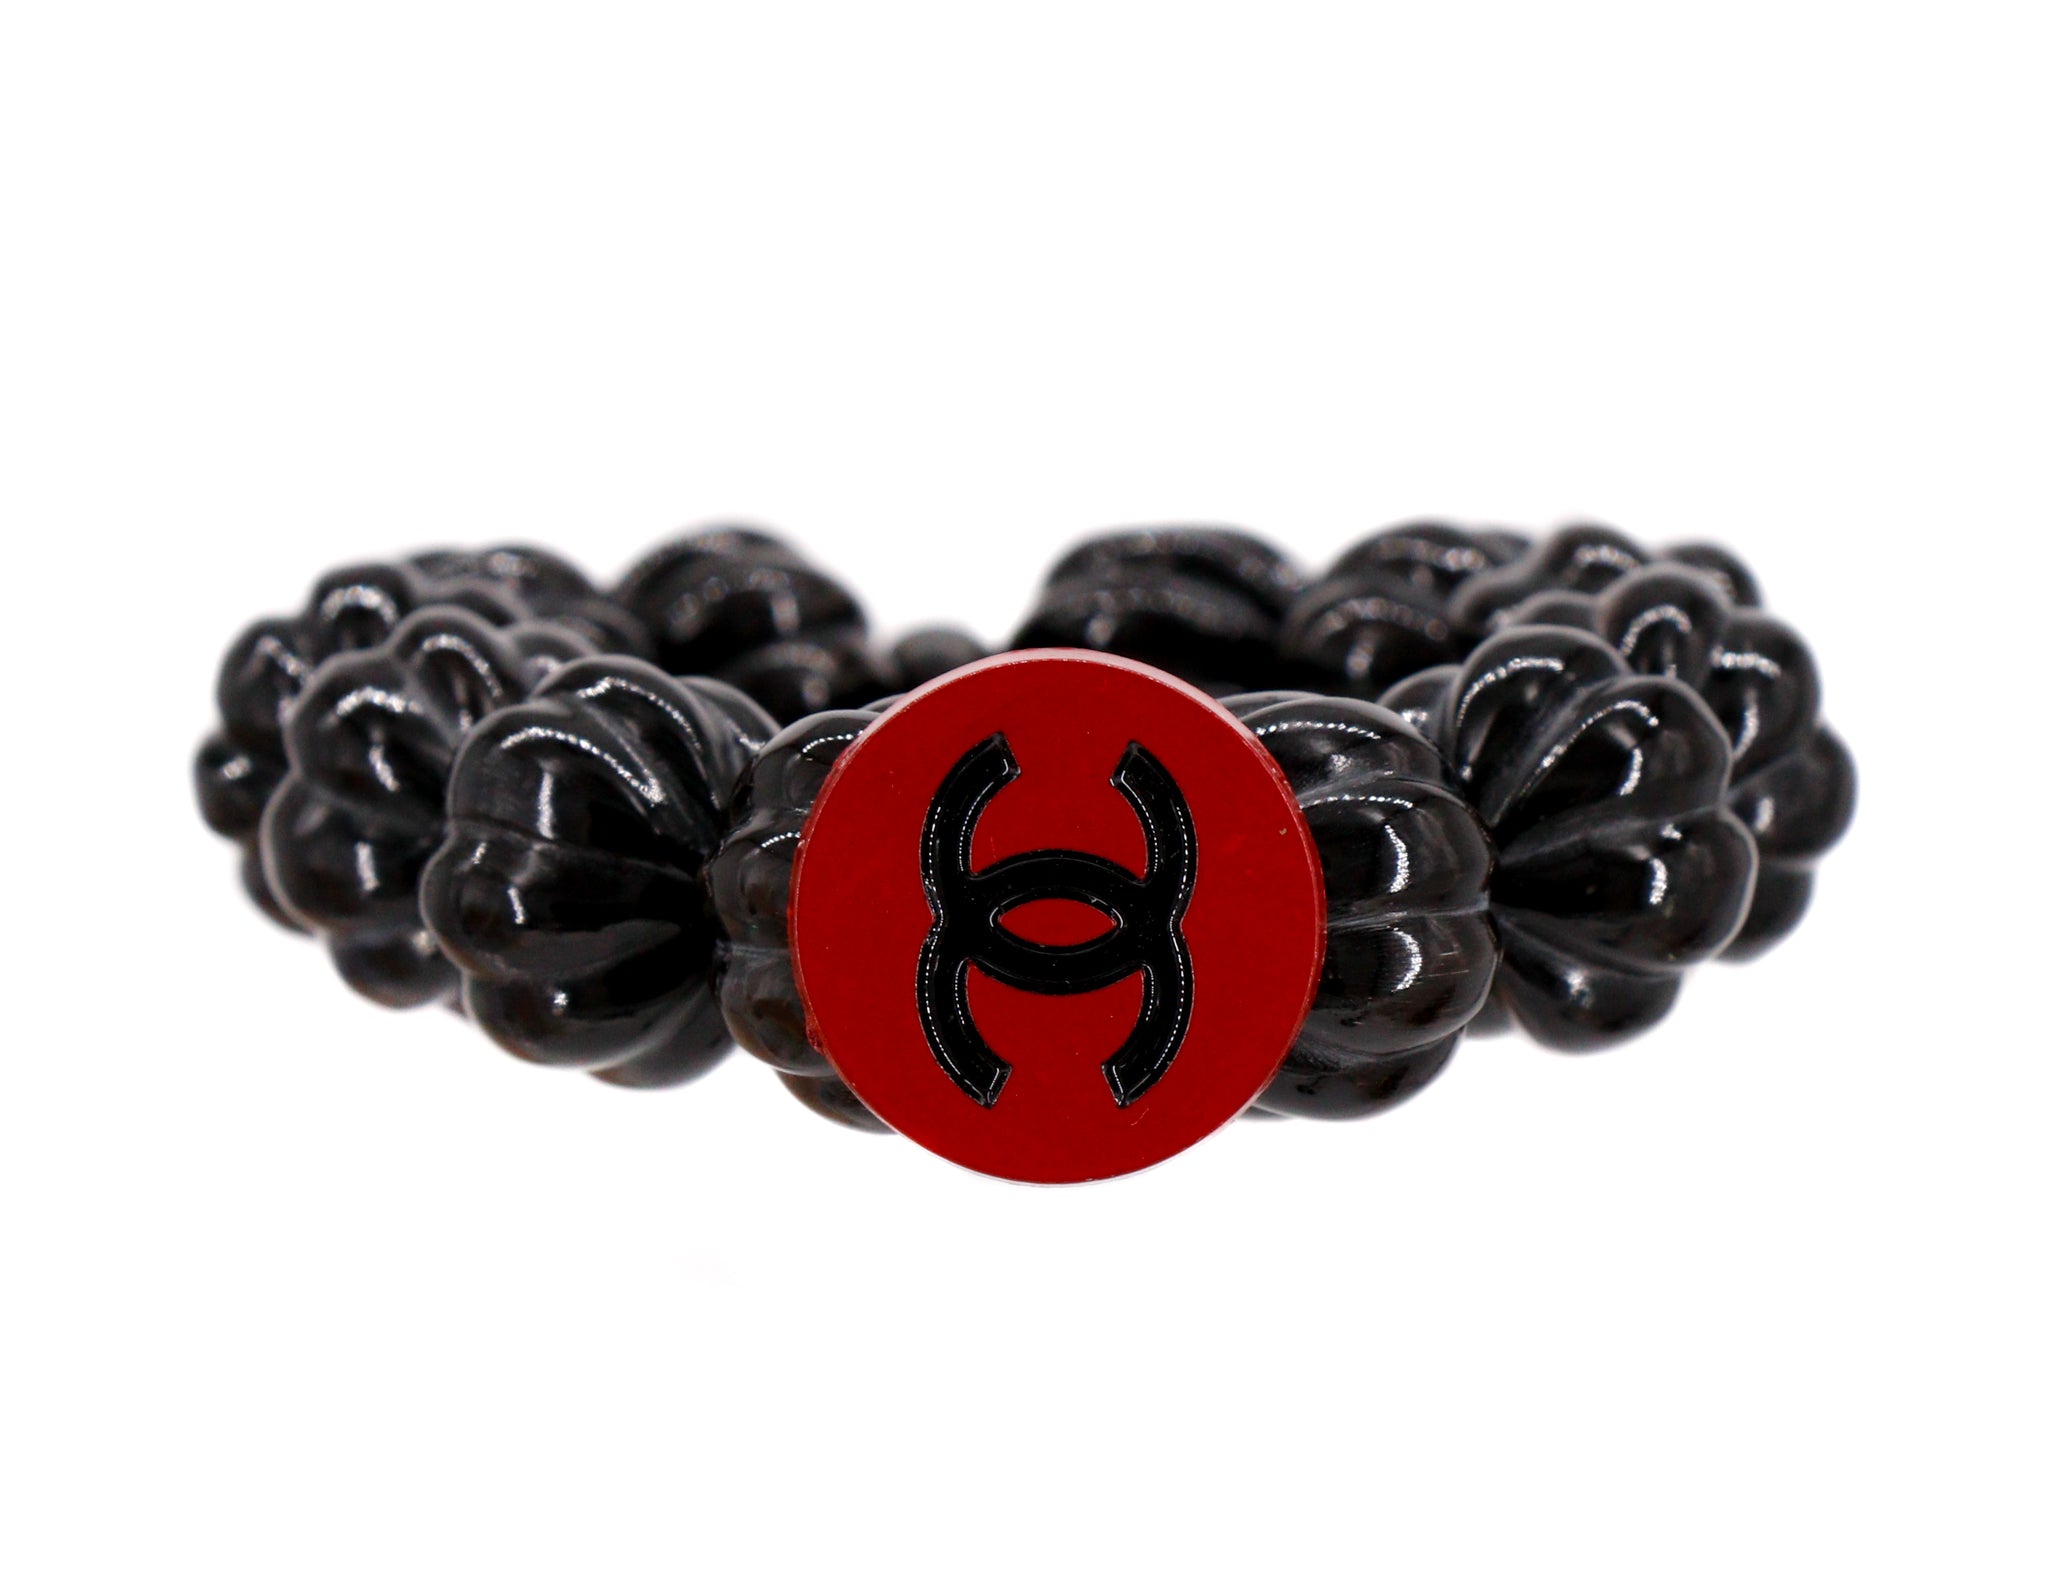 Carved black bracelet with repurposed red button